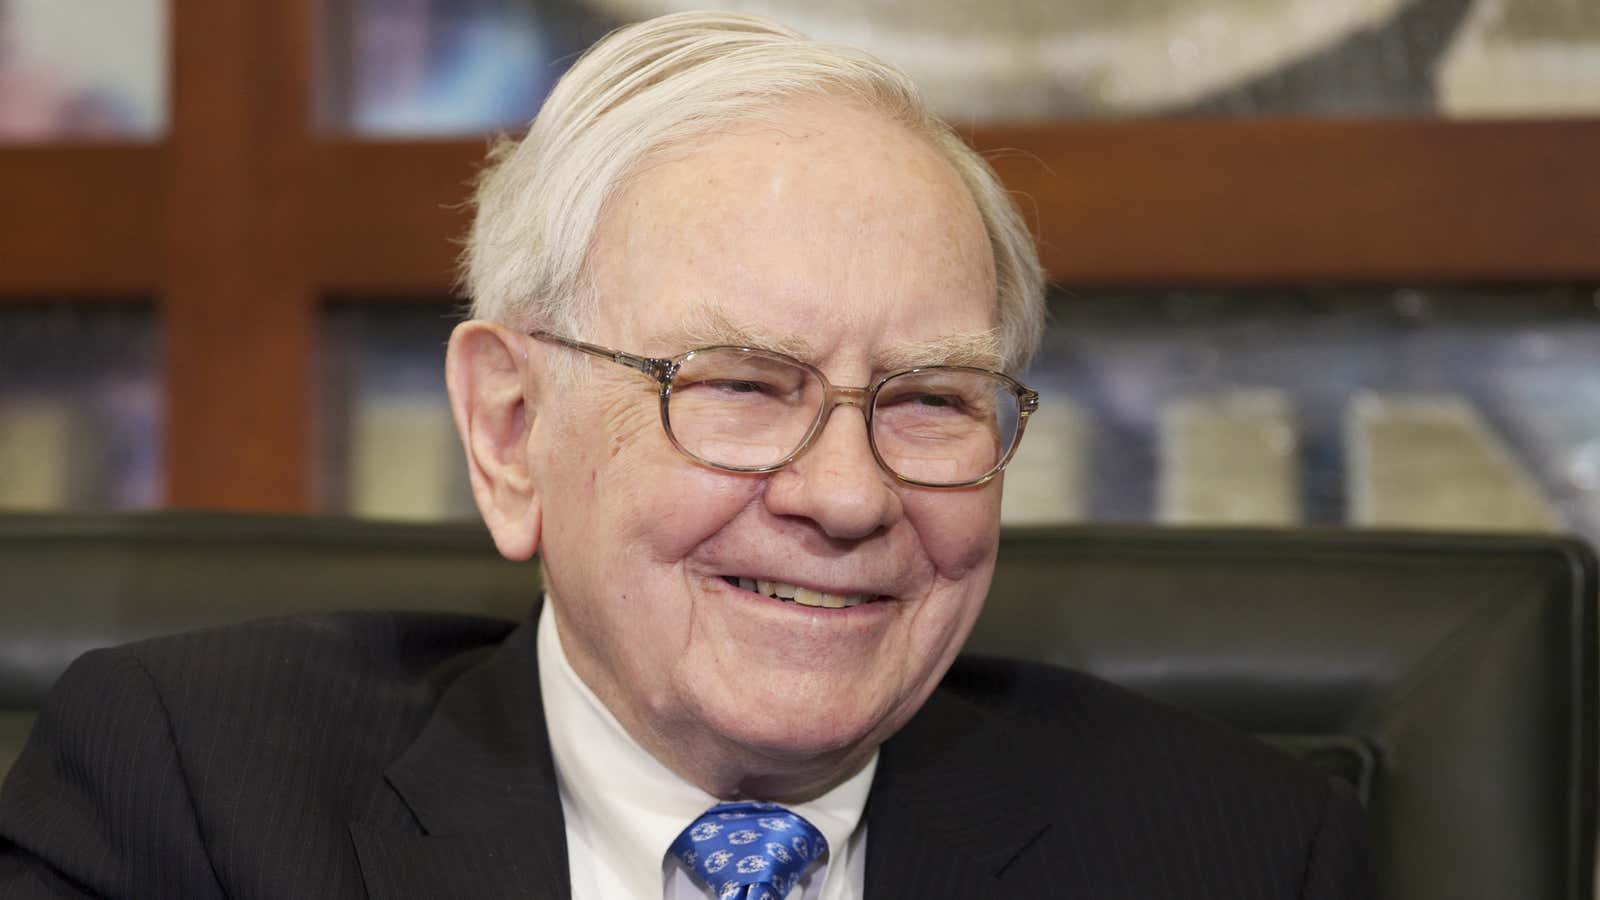 He’s still smiling, but Buffett  hasn’t beat his bogey in four of the last five years.